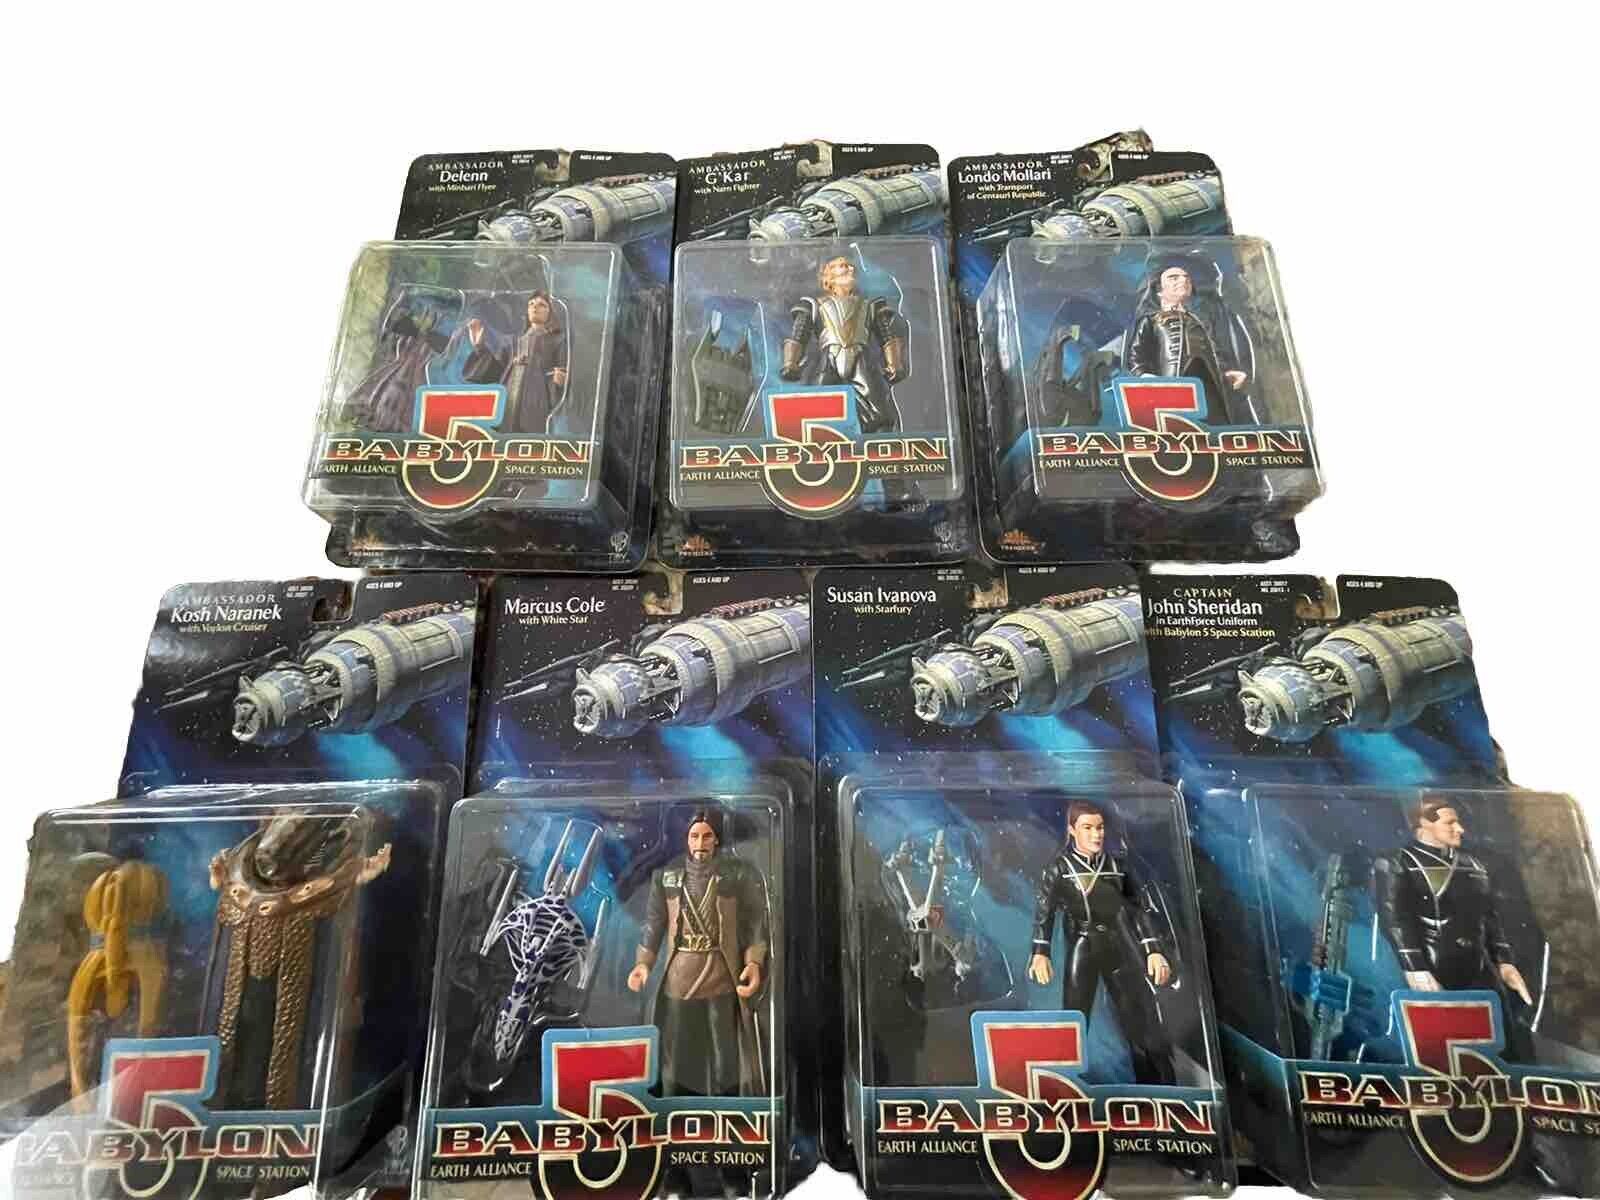 1997 Babylon 5 Earth Alliance Space Station Exclusive Premiere Lot of 7 Sealed